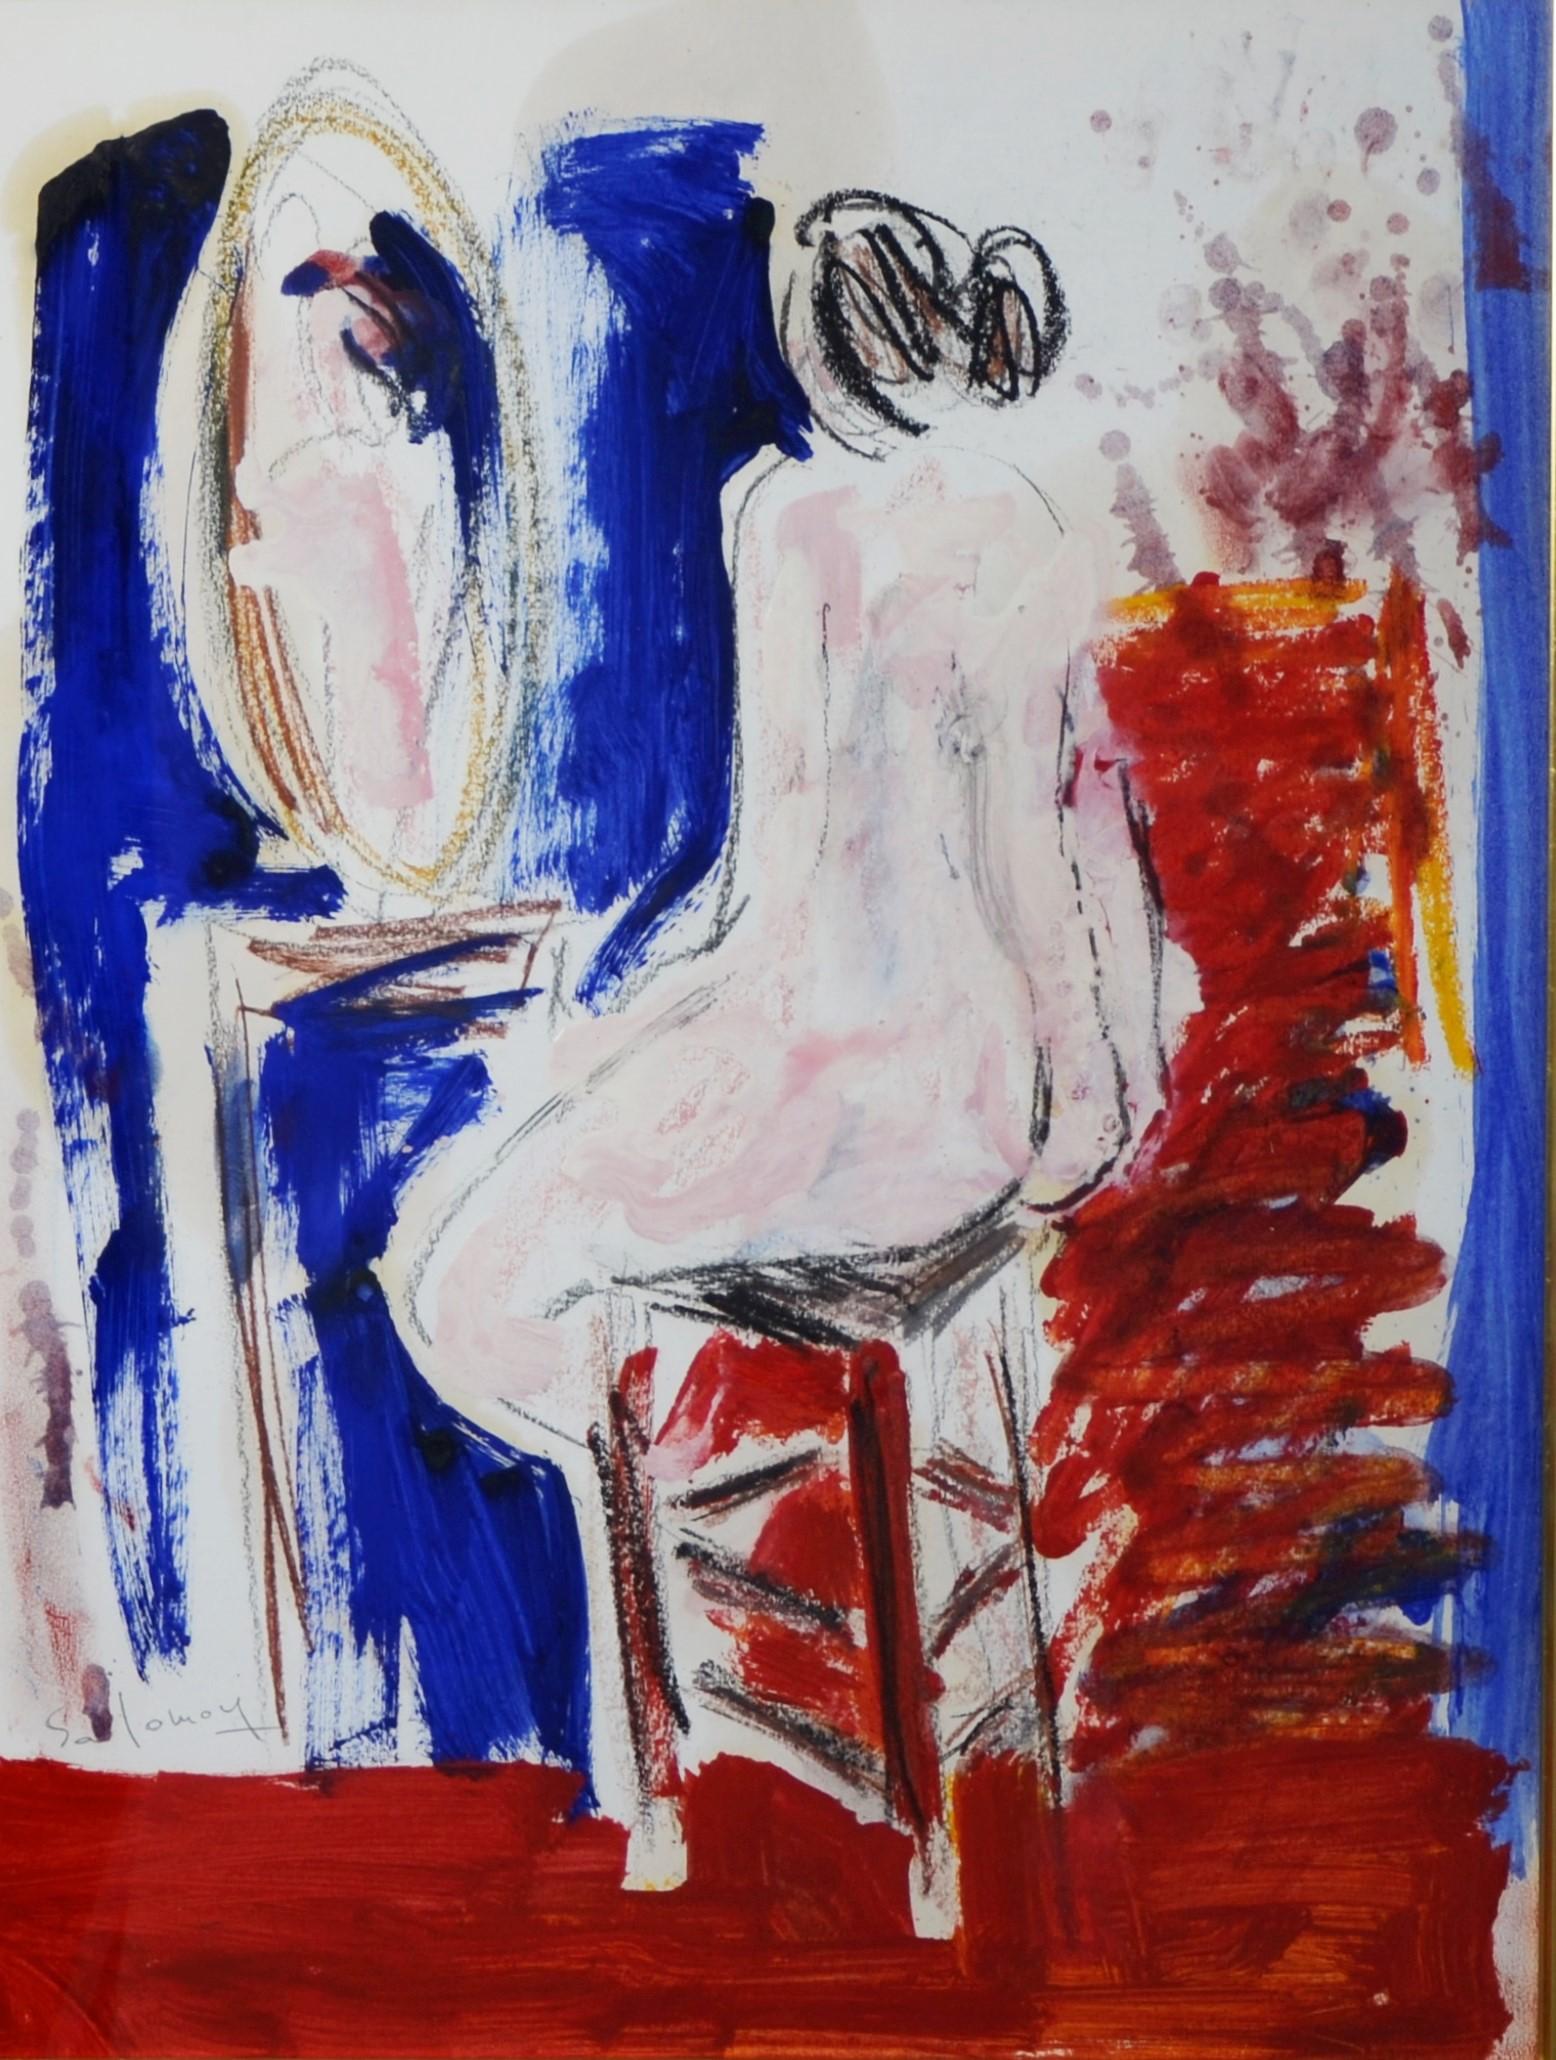 Paper JC Salomoy Expressionist Figure at Dressing Table Painting in Red, Blue & Black For Sale